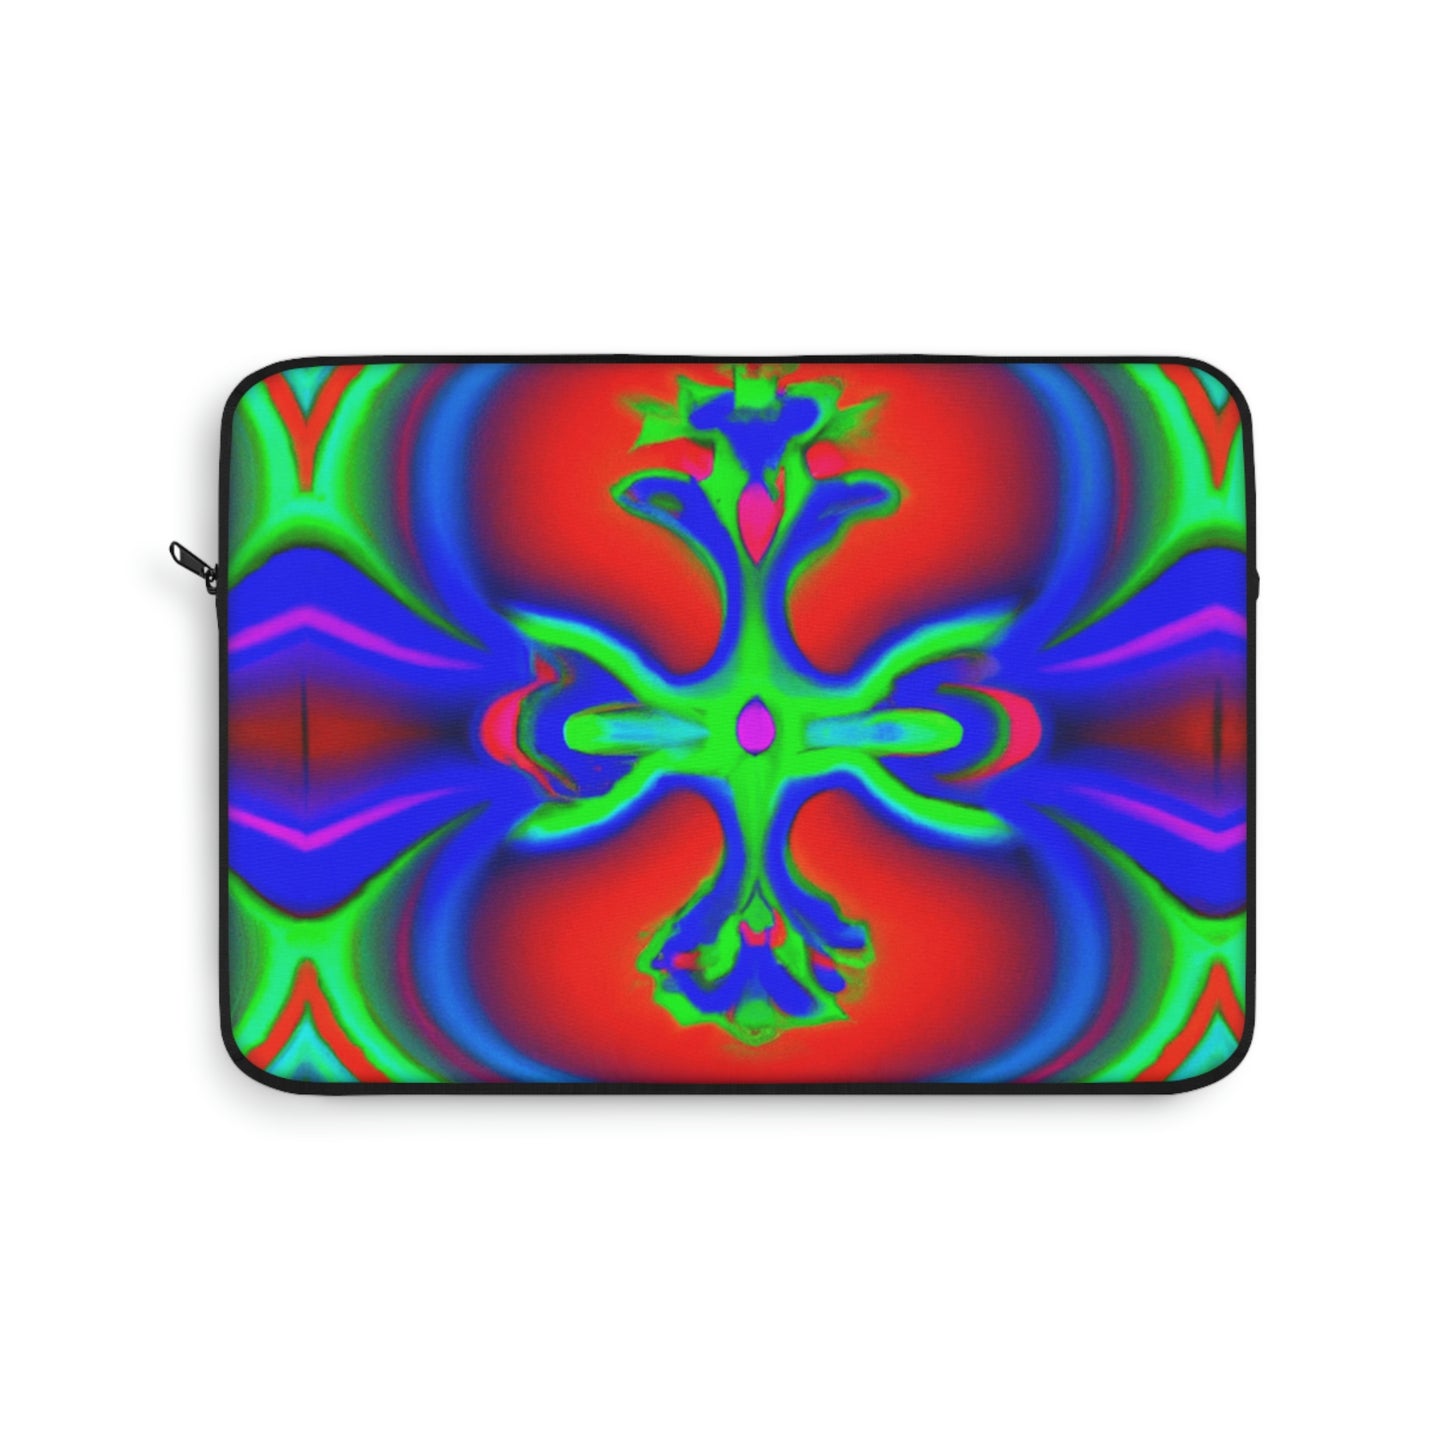 Sparky Spacehopper - Psychedelic Laptop Computer Sleeve Storage Case Bag